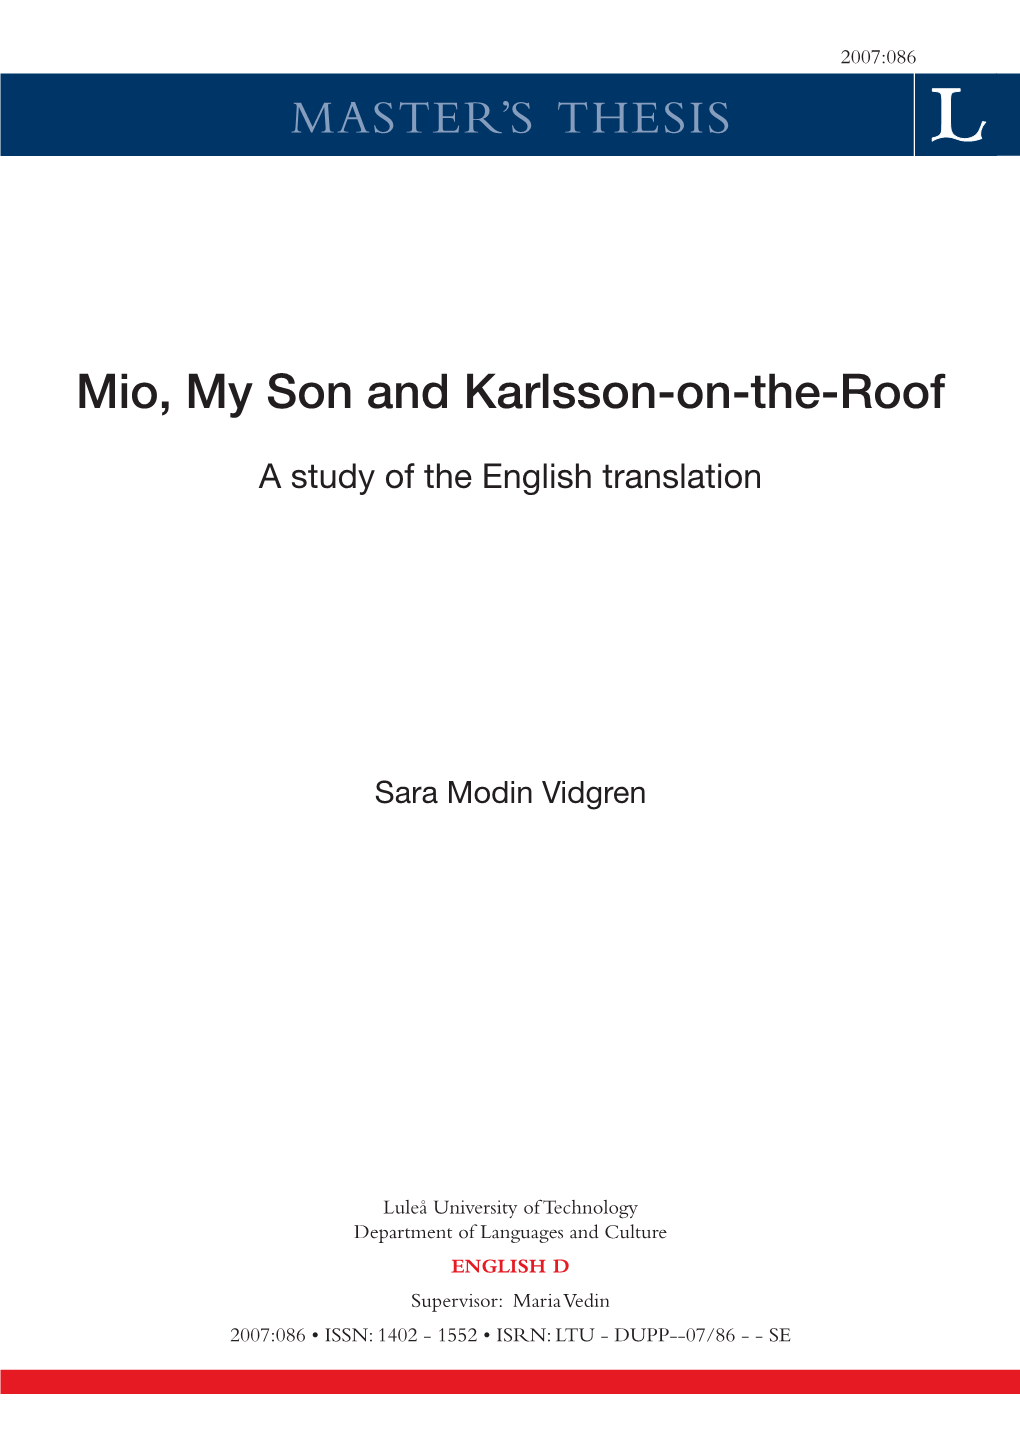 MASTER's THESIS Mio, My Son and Karlsson-On-The-Roof